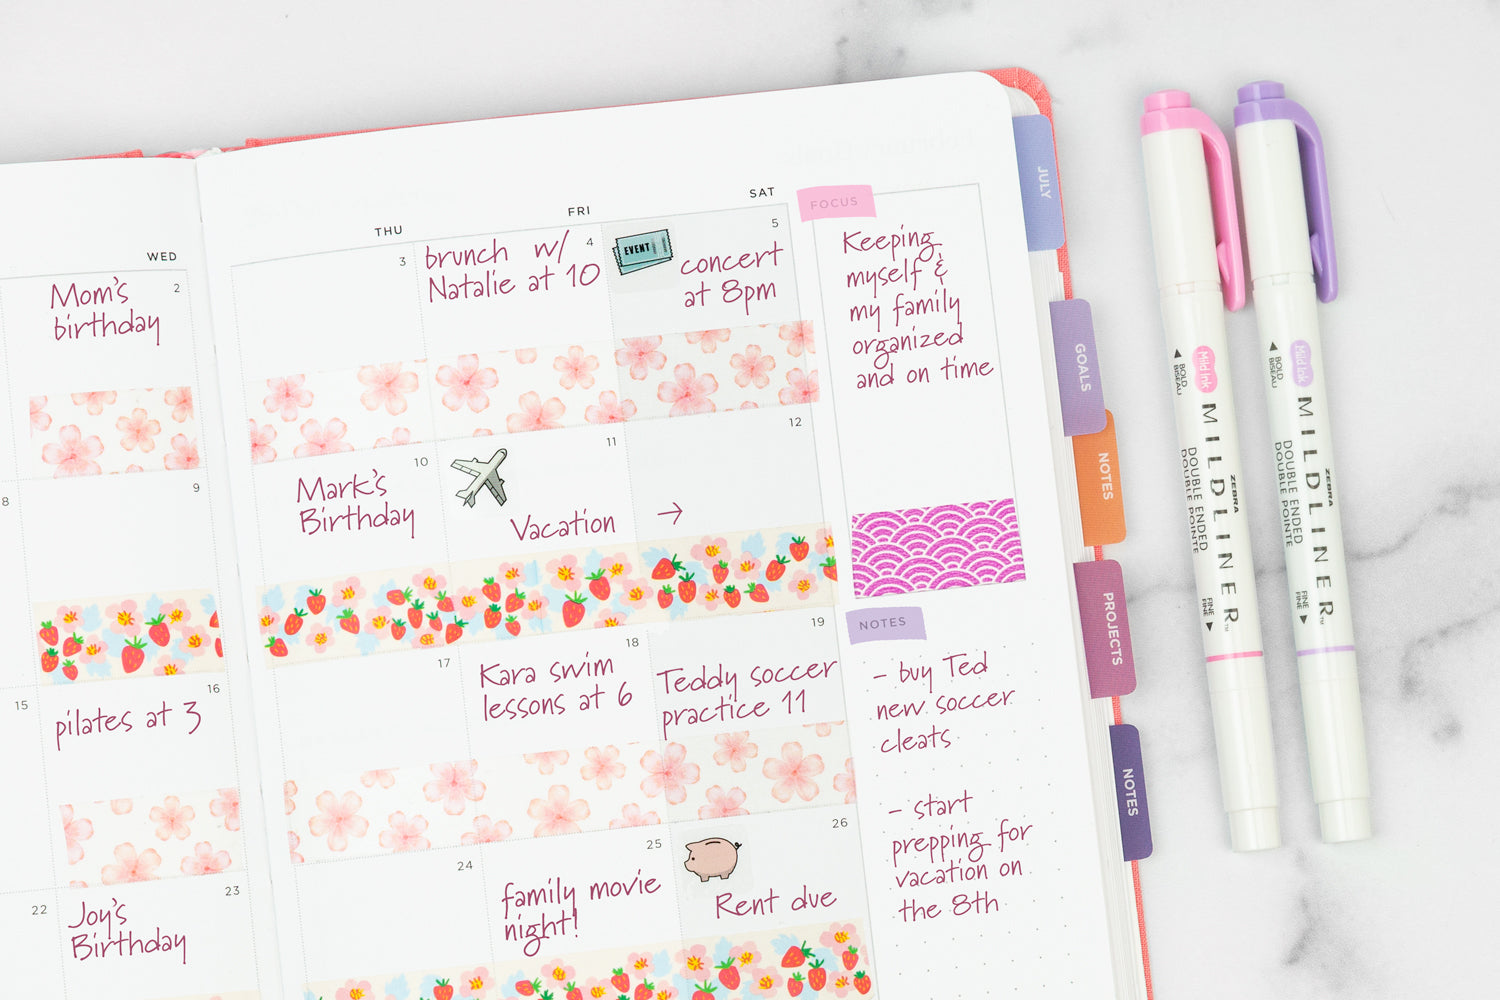 A planner calendar page filled out with pink ink and colorful washi tape